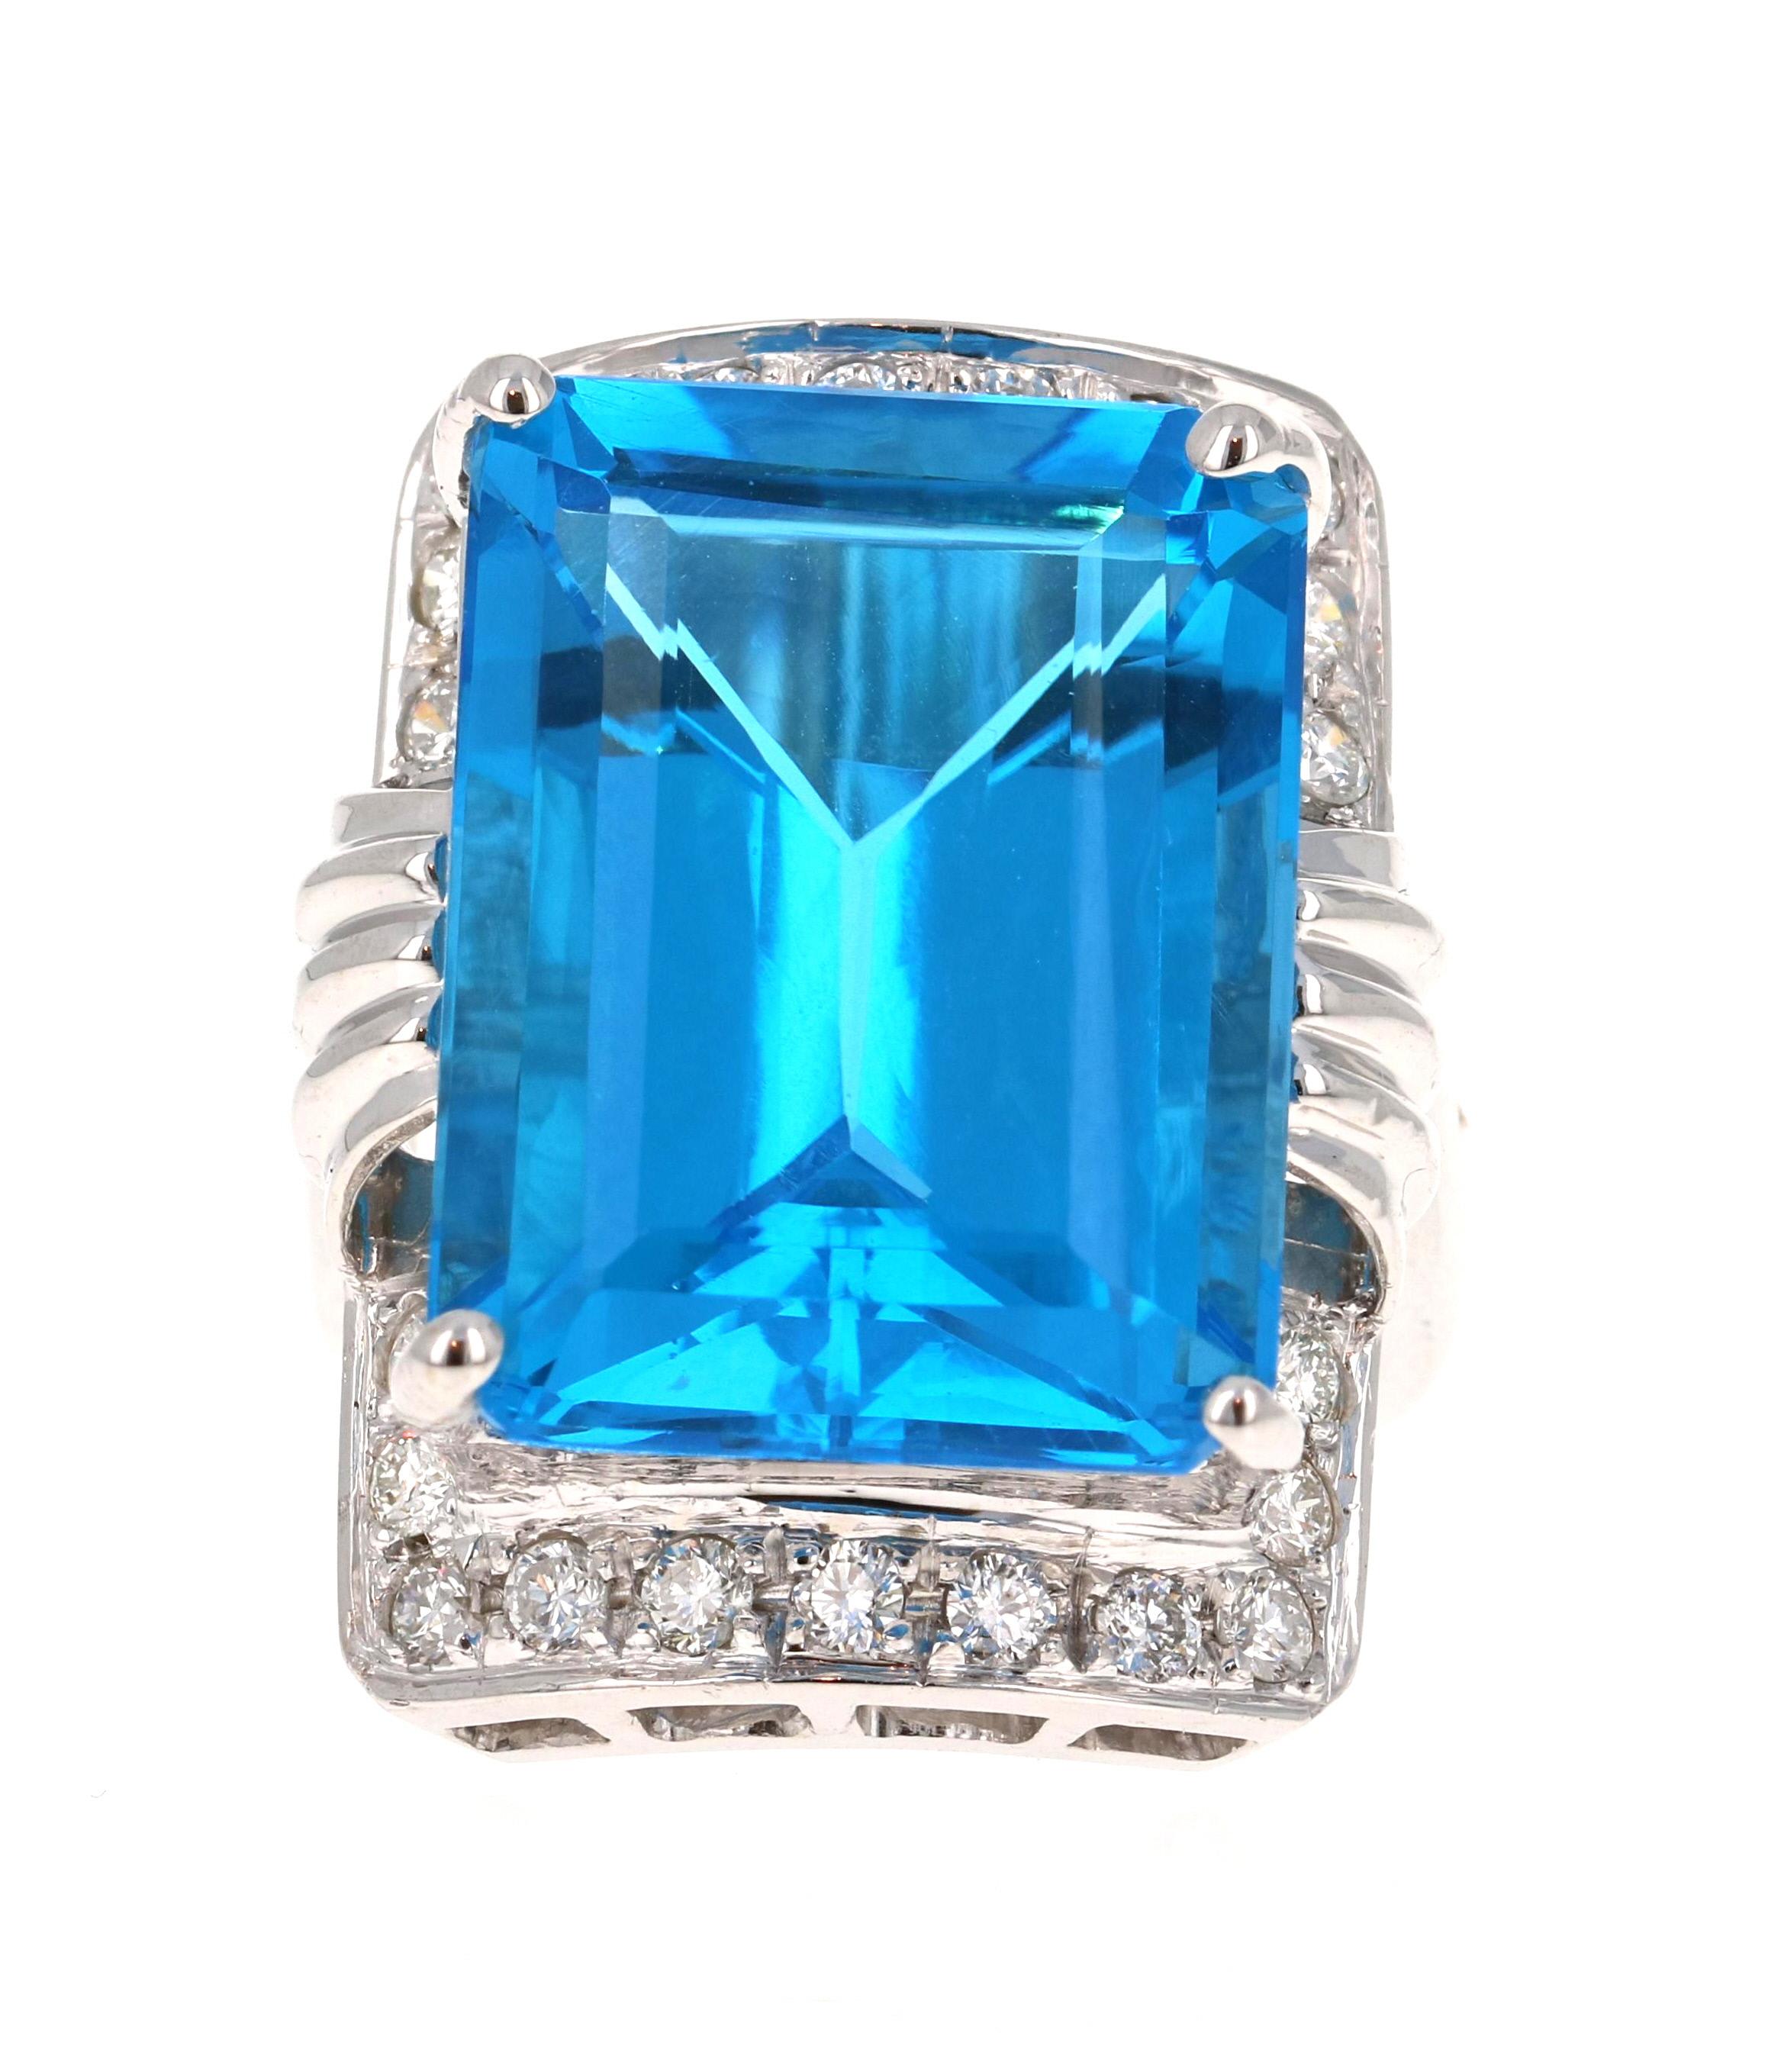 Contemporary 26.07 Carat Emerald Cut Blue Topaz Diamond White Gold Cocktail Ring For Sale